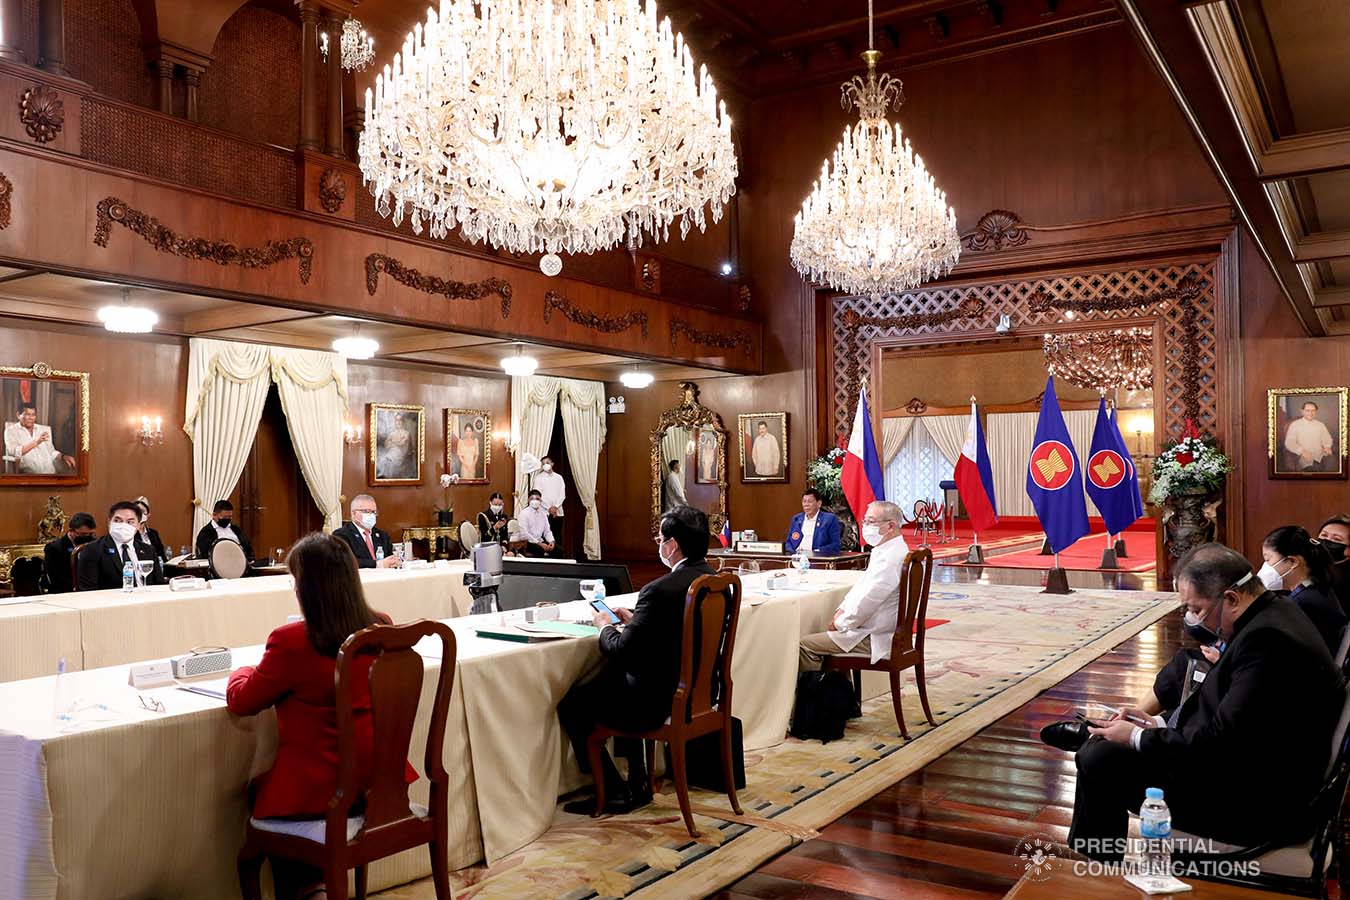 President Rodrigo Roa Duterte joins other leaders from the Association of Southeast Asian Nations (ASEAN) member countries in the virtual 14th Brunei Darussalam–Indonesia–Malaysia–Philippines East ASEAN Growth Area (BIMP-EAGA) Summit at the Malacañang Palace on October 28, 2021. ALBERTO ALCAIN/ PRESIDENTIAL PHOTO